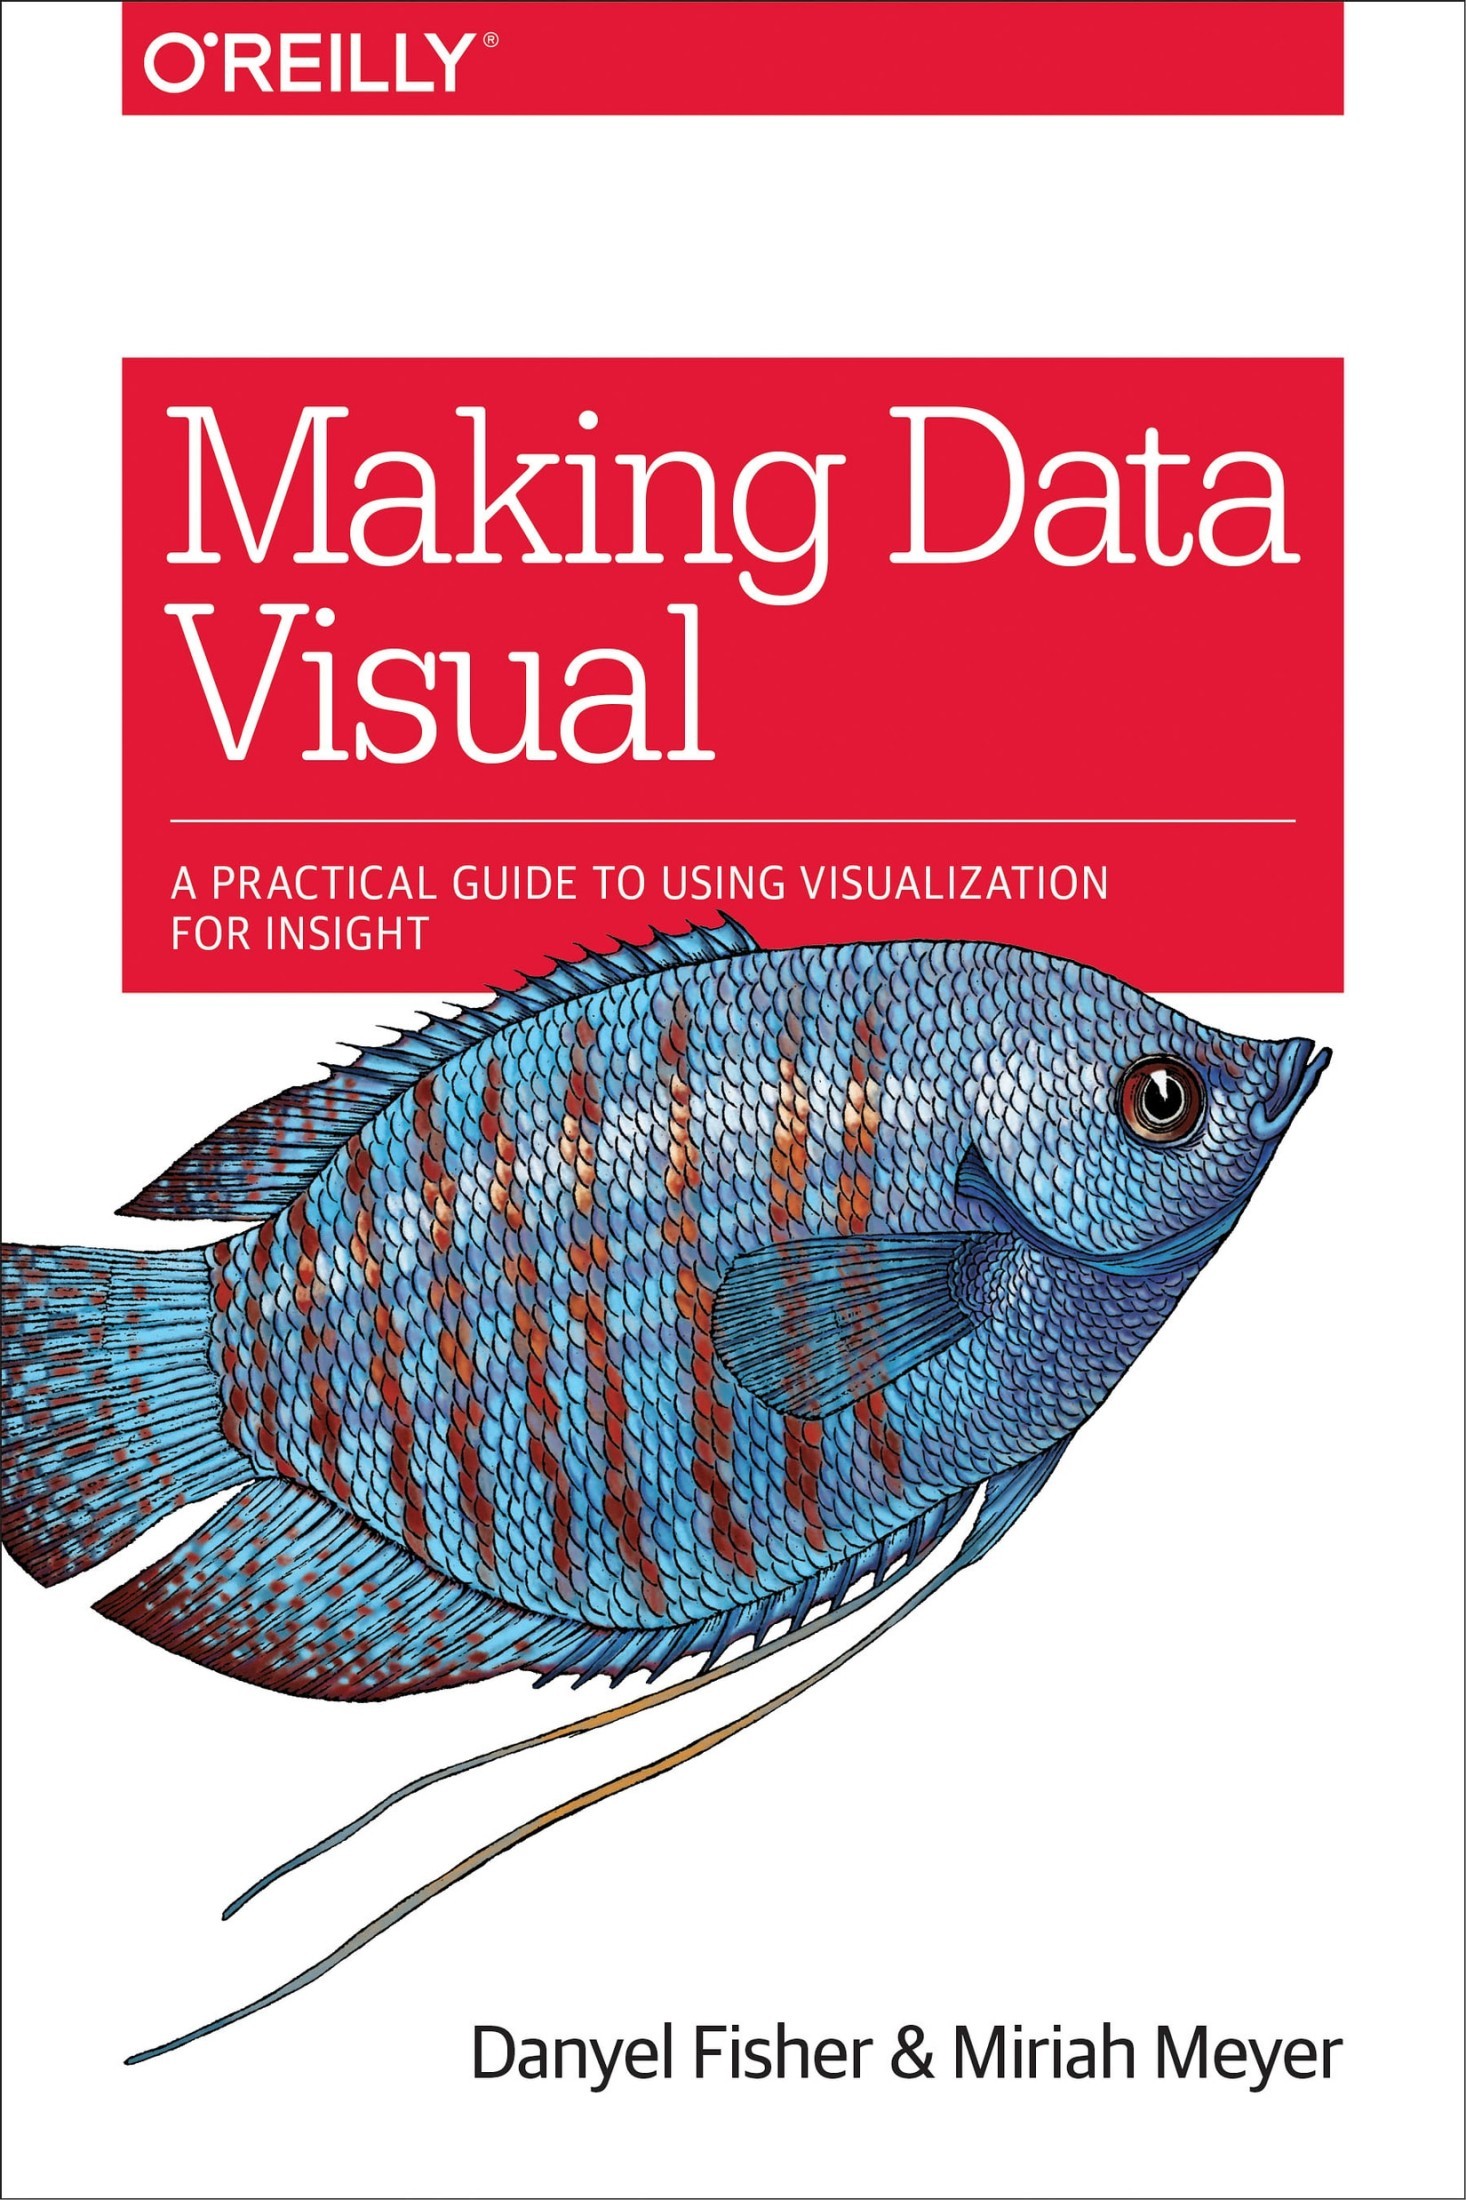 Making Data Visual: A Practical Guide to using Visualization for Insight